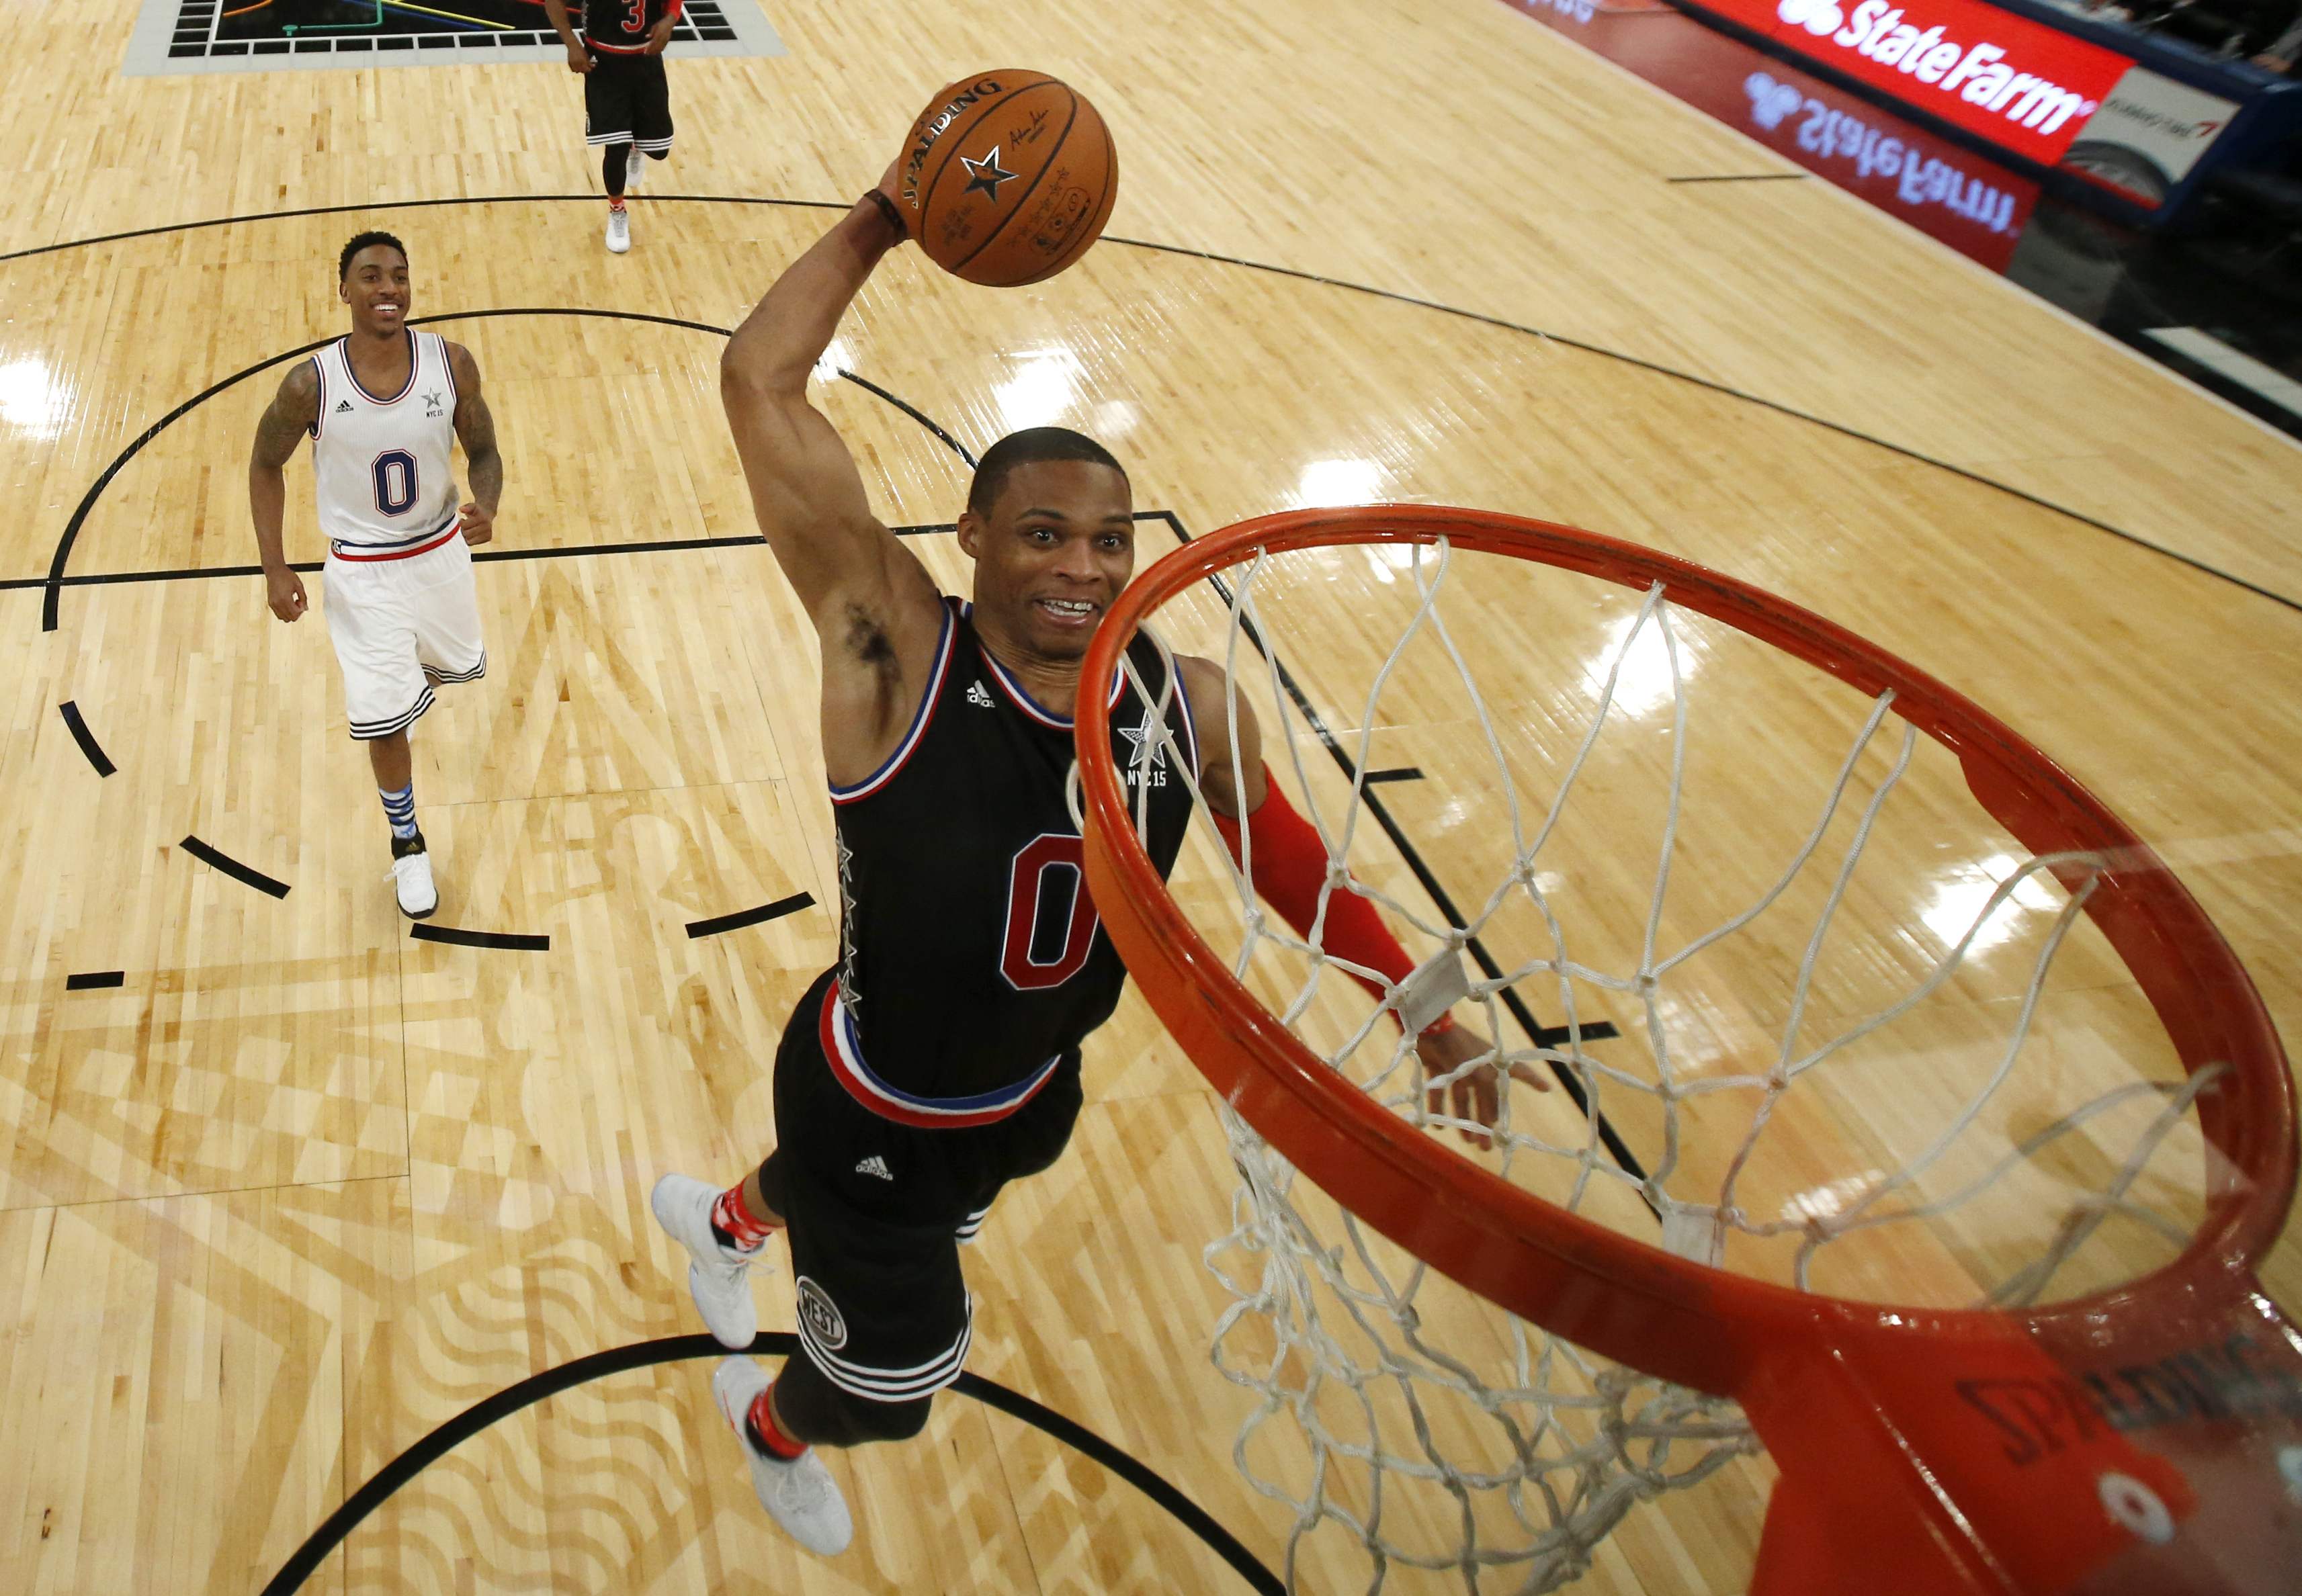 The Western Conference's Russell Westbrook on his way to a tally of 41 points. Photo: AP